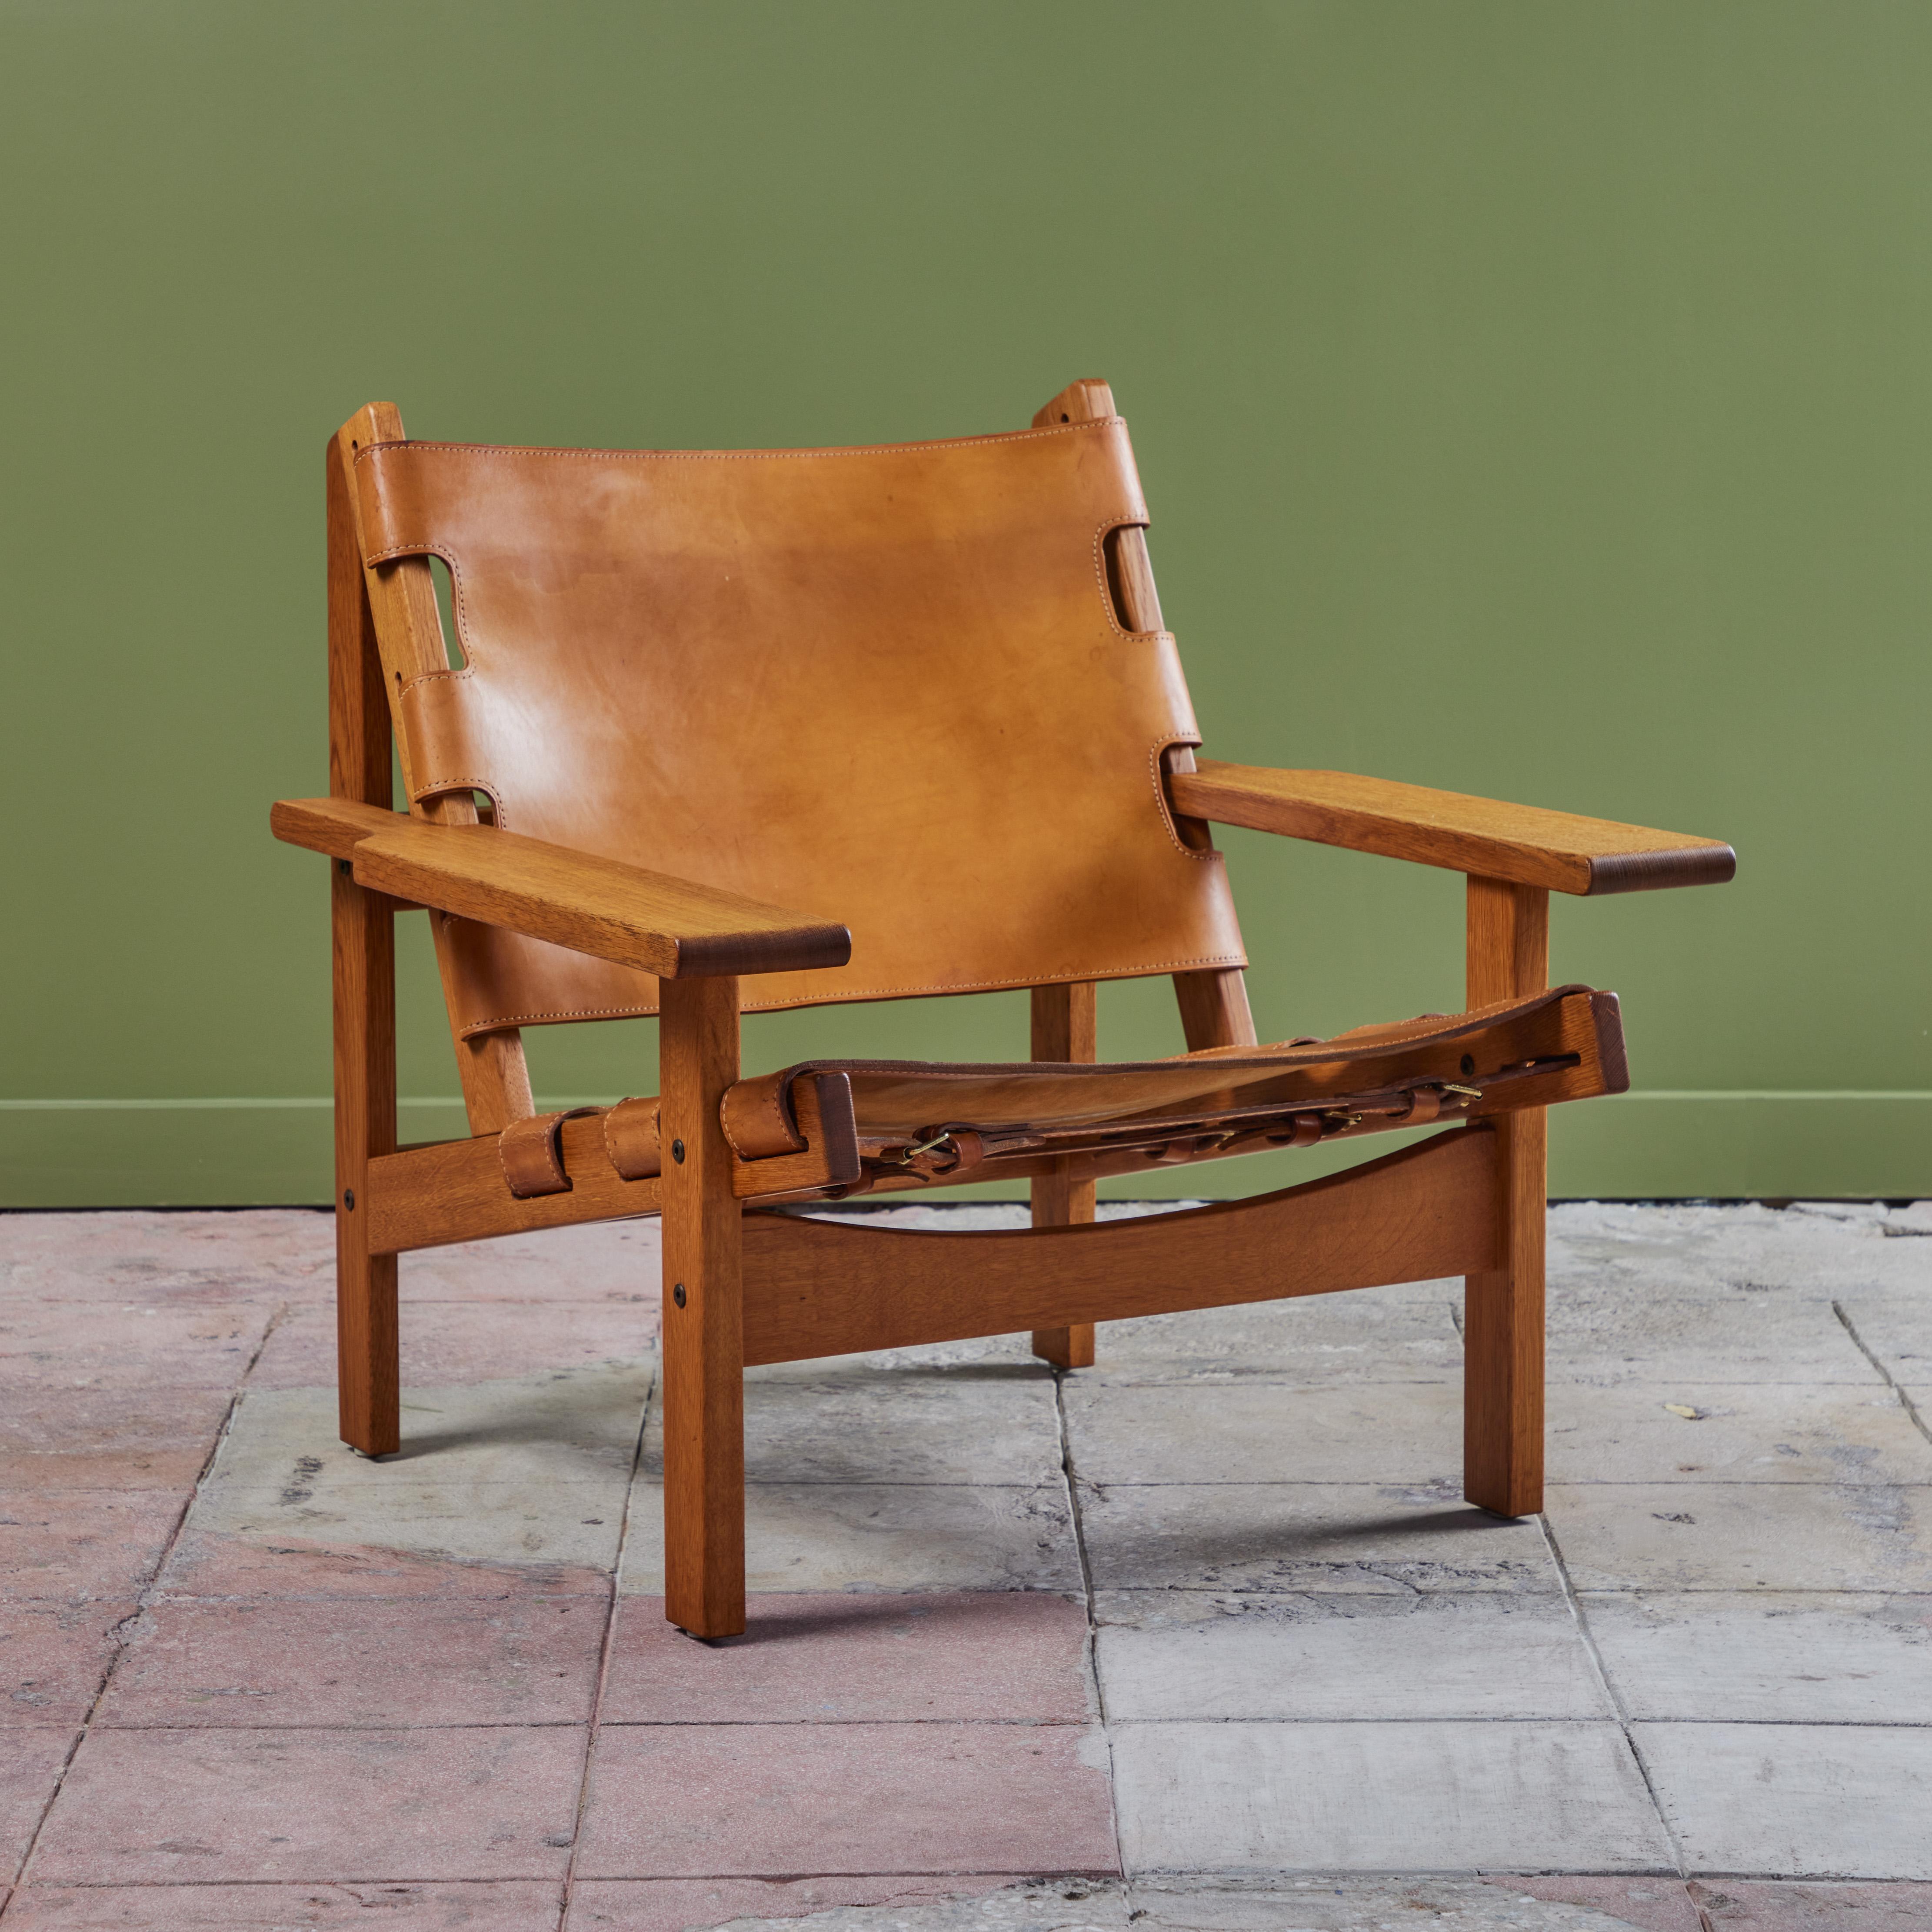 Lounge chair by Kurt Ostervig, c.1960s, Denmark. The low slug lounge chair also referred to as the hunting chair has an oak frame with angular armrests. The aged cognac saddle leather backrest and seat rest are rich with character, consistent with